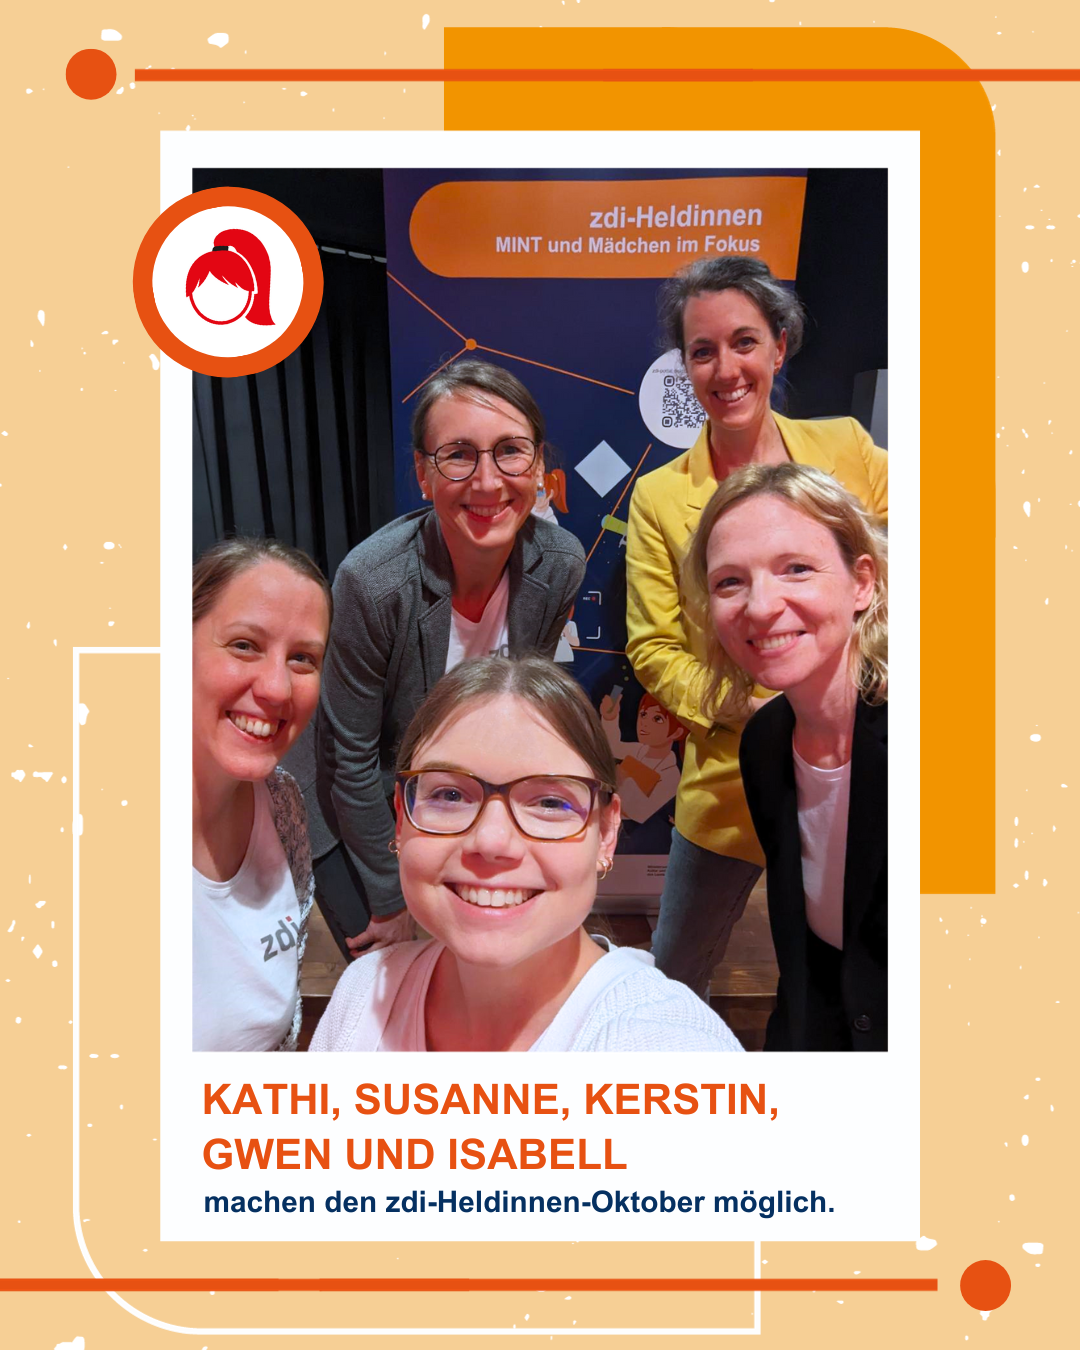 The photo shows five women smiling into the camera. Below it says: "Kathi, Susanne, Kerstin, Gwen and Isabell make the zdi heroines October possible."